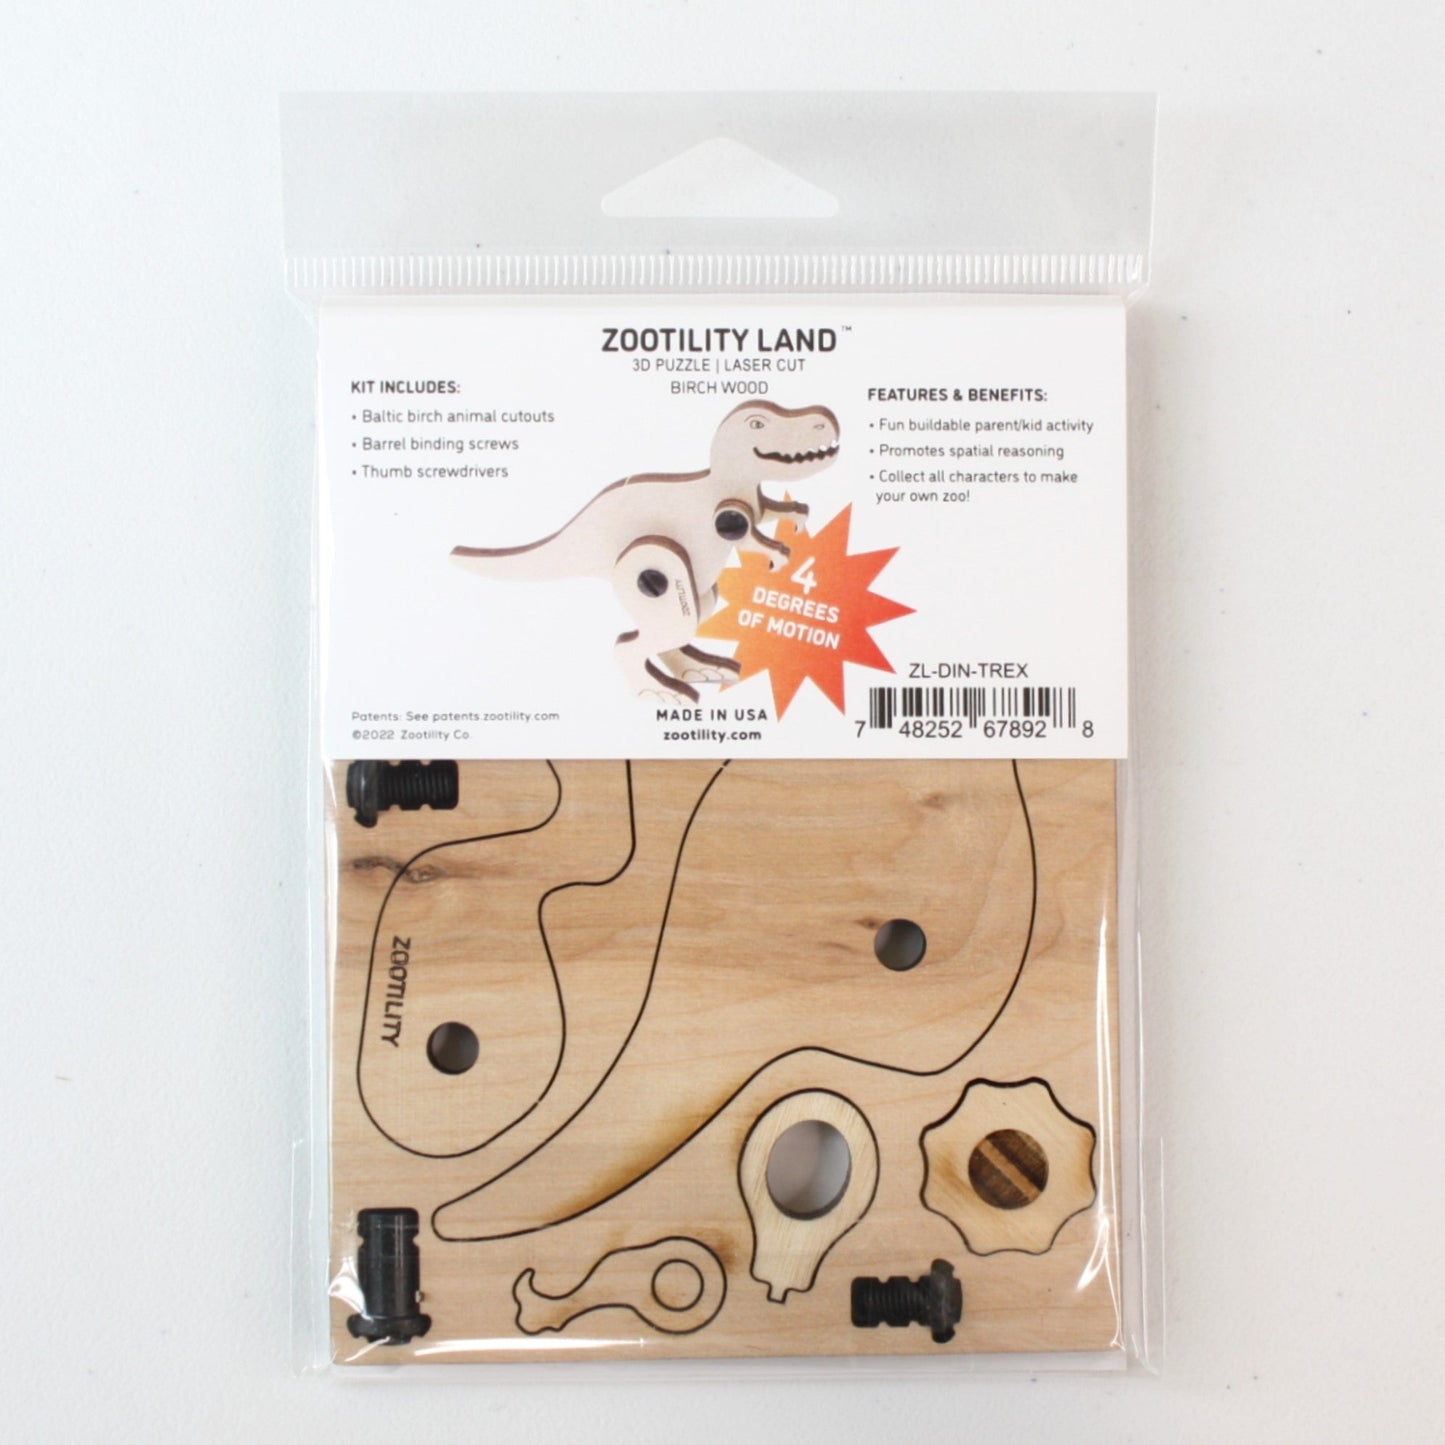 Wooden 3d Puzzle T-Rex - Made in the USA